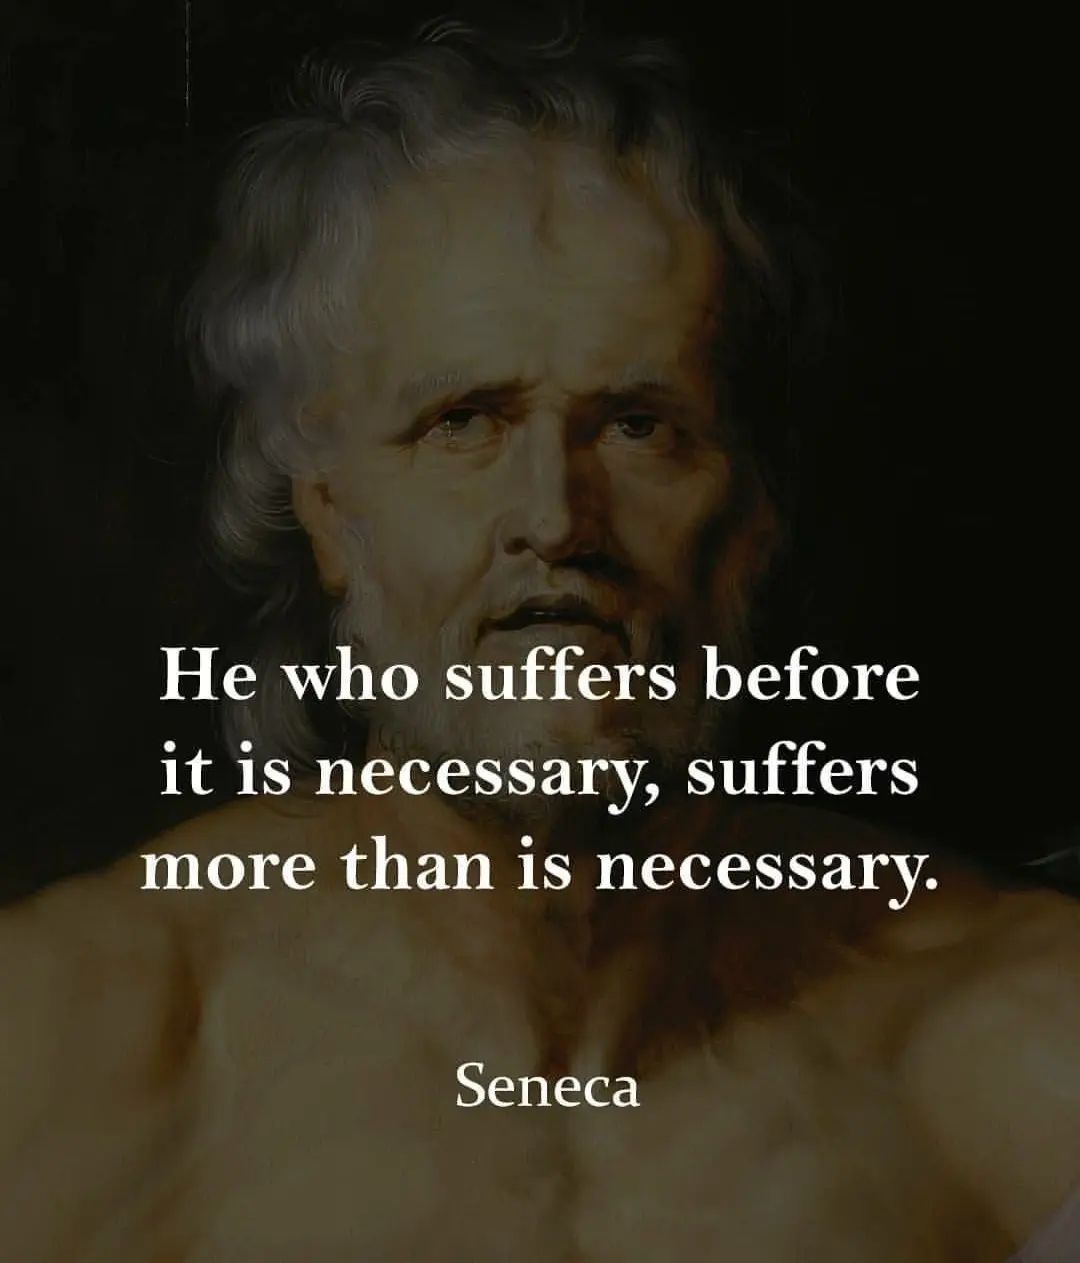 He suffers more than necessary, who suffers before it is necessary.